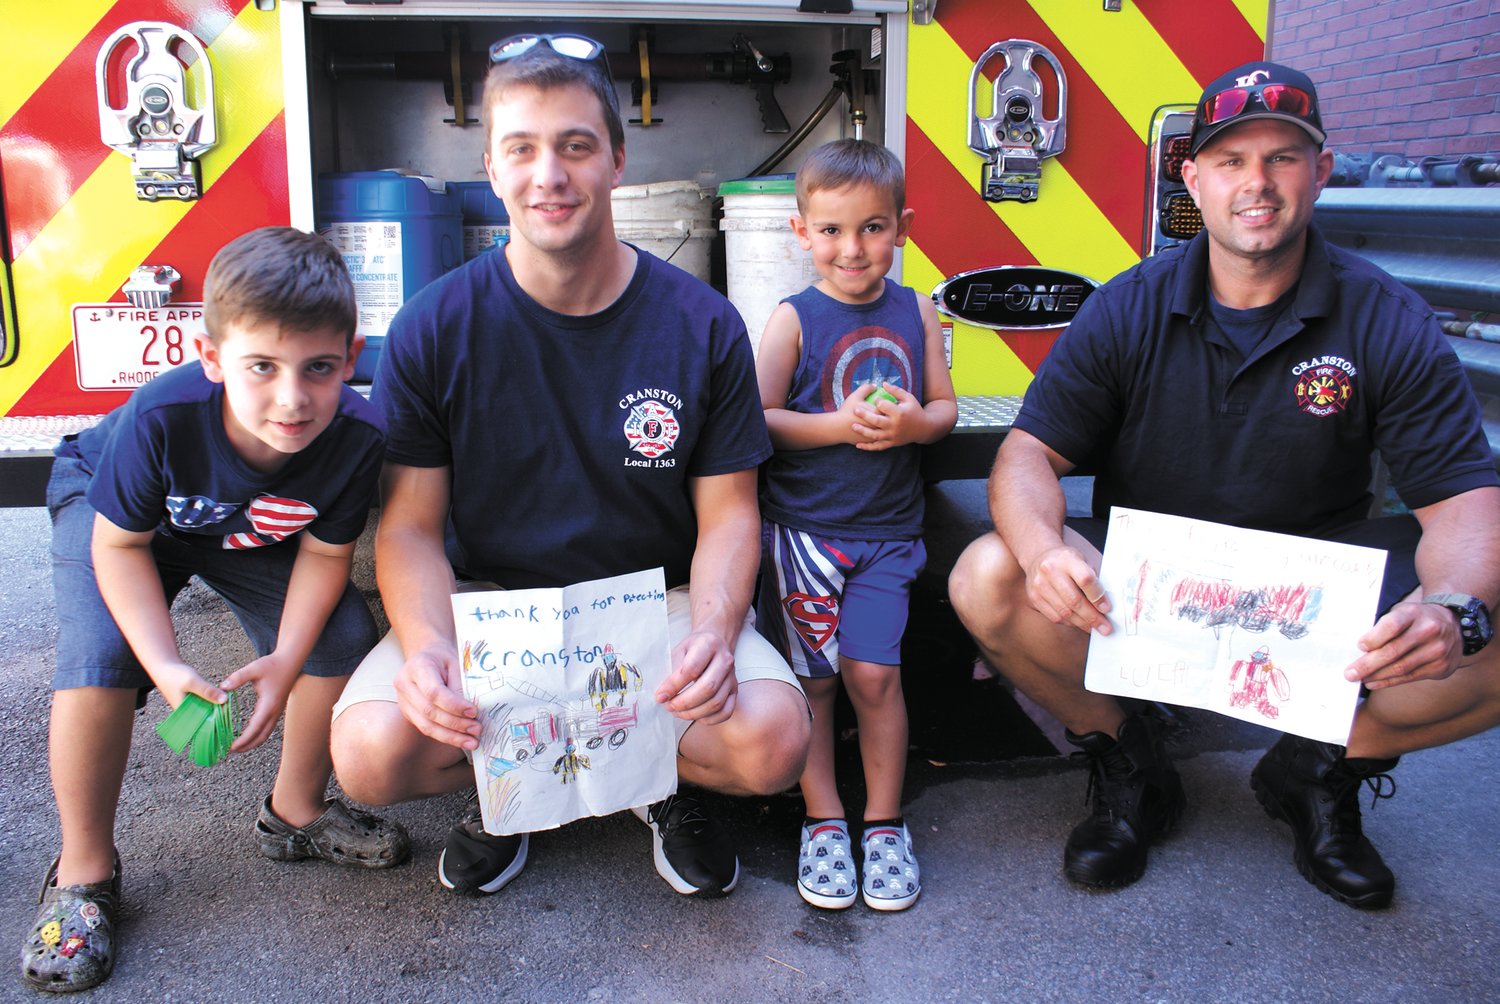 AN ARTISTIC THANK YOU: The Forte Brothers – Rocco, 7, and Luca, 4, – pose with firefighters Alex Cardoso and Corey Rebello who are holding drawings given to them by Rocco and Luca.